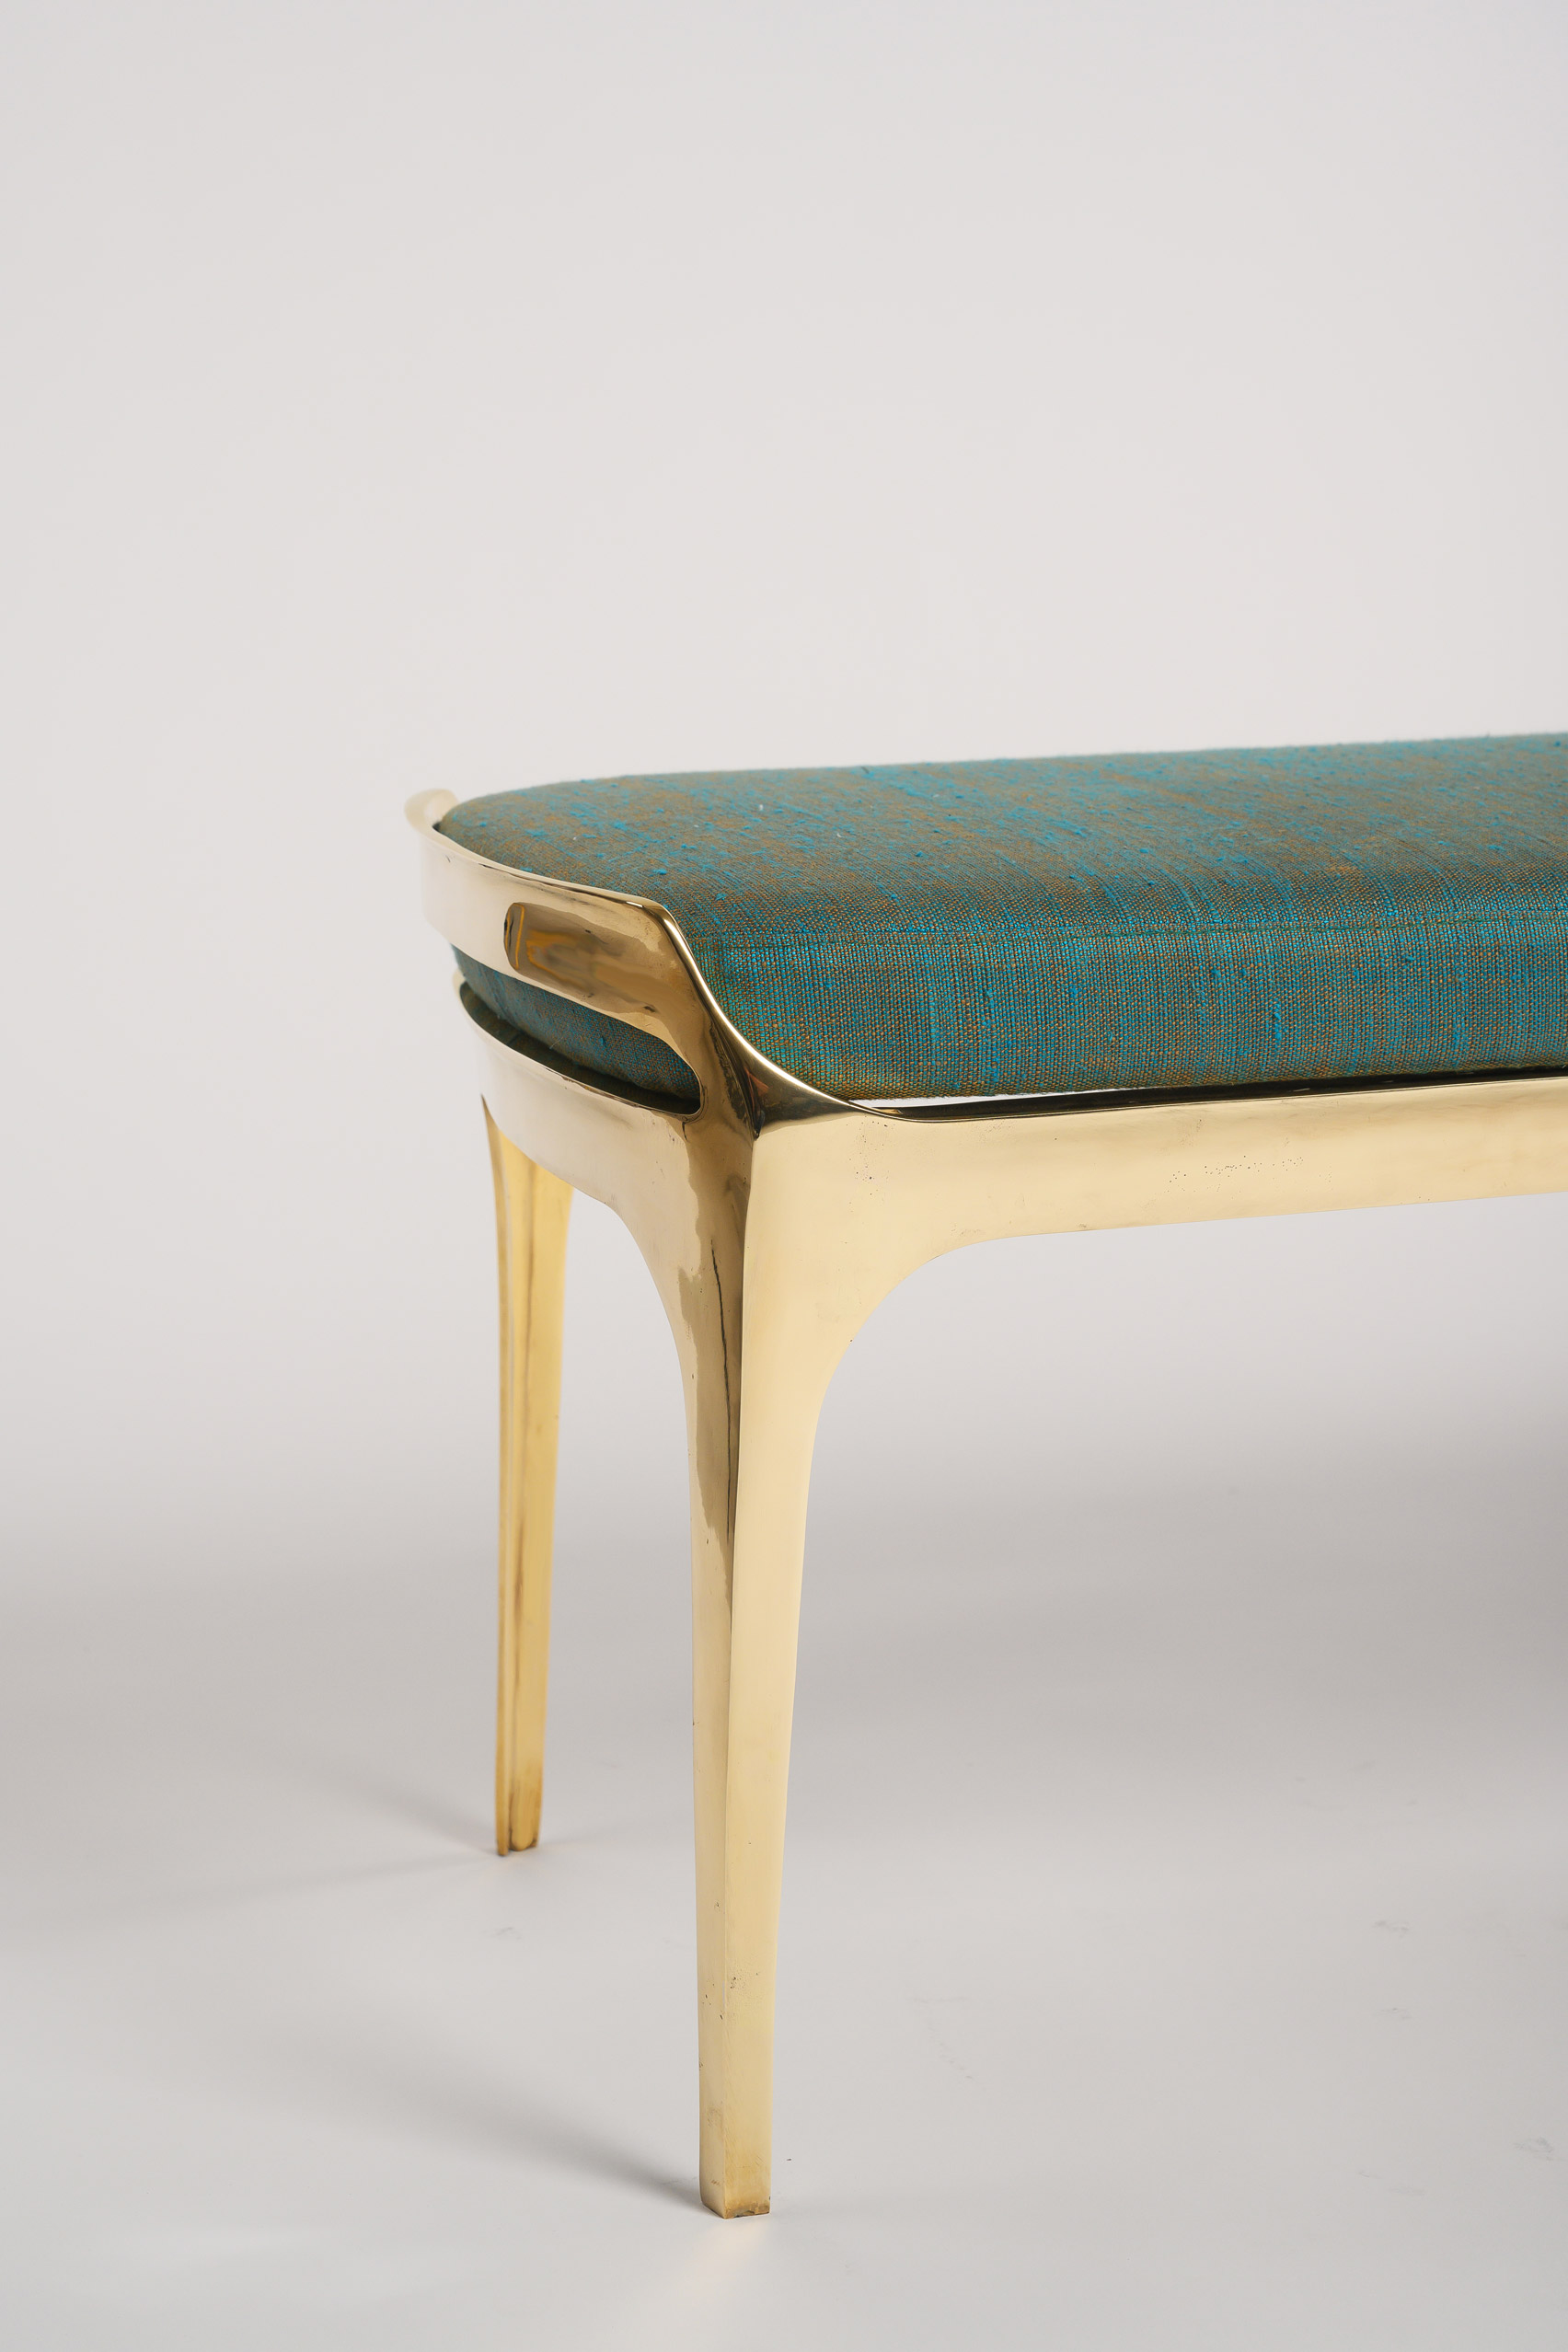 End of Bruda bench by Elan Atelier showing its gleaming gold finish